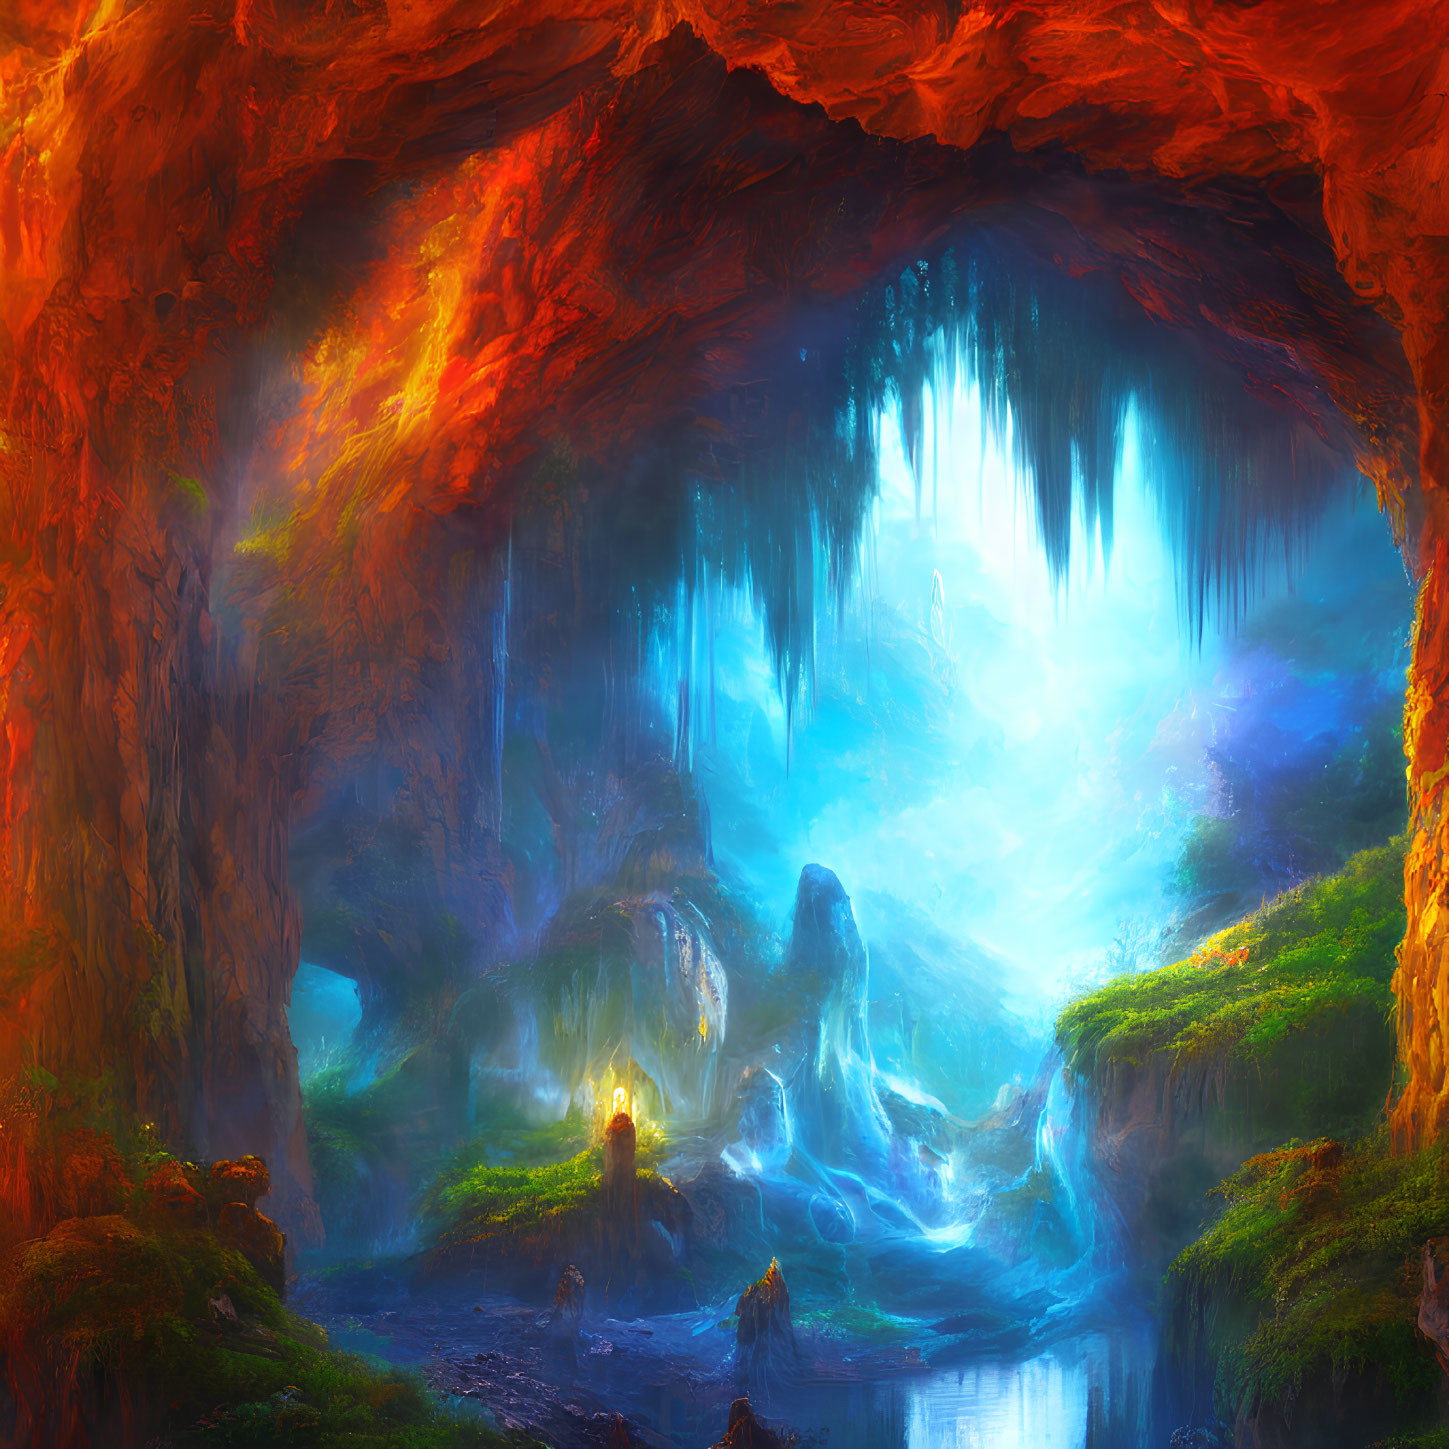 Mystical Cave with Glowing Blue Pond and Fiery Orange Walls